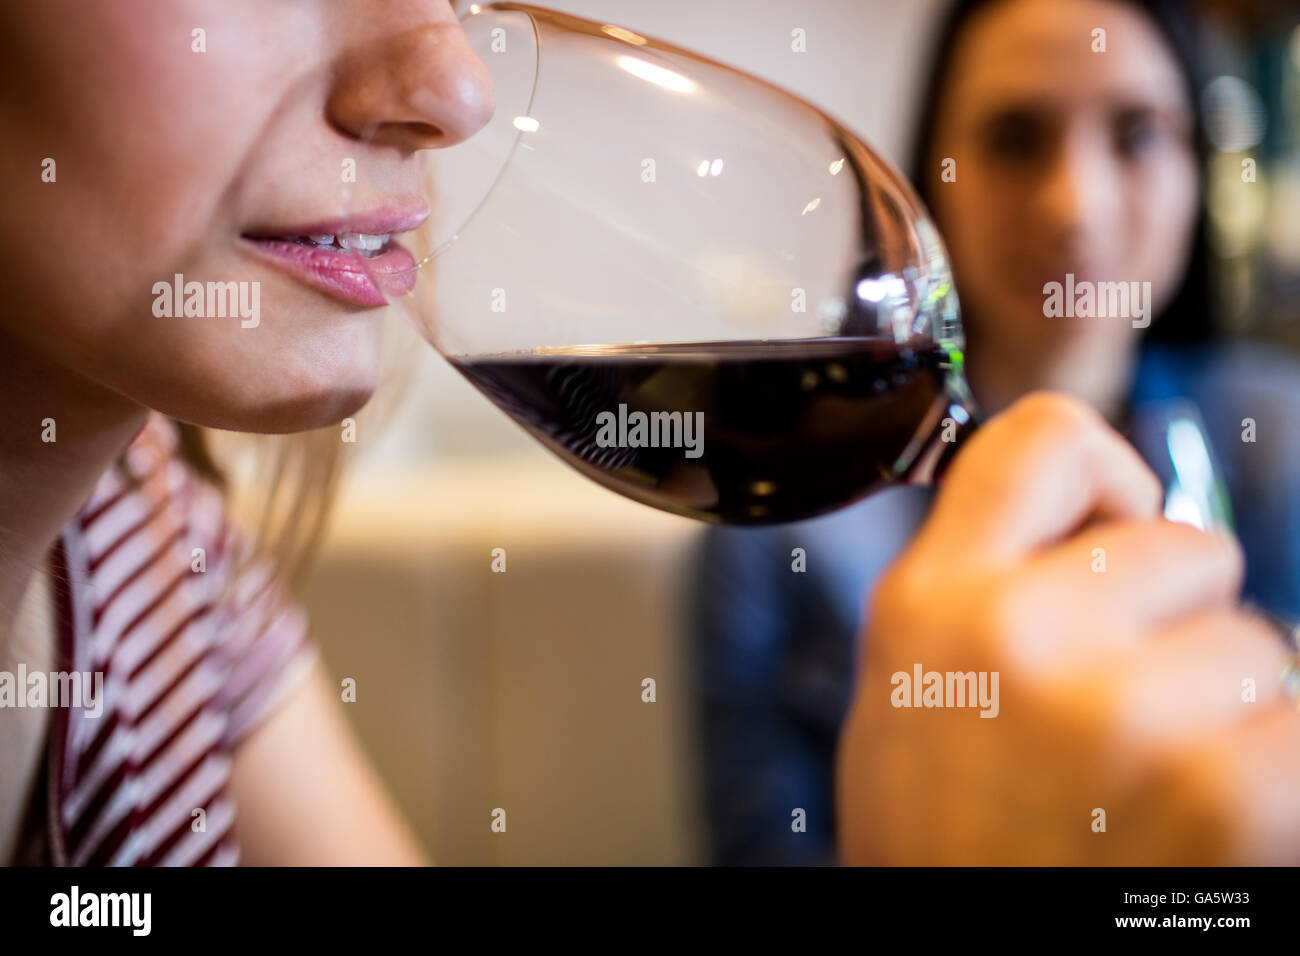 Cropped image of woman drinking wine Stock Photo